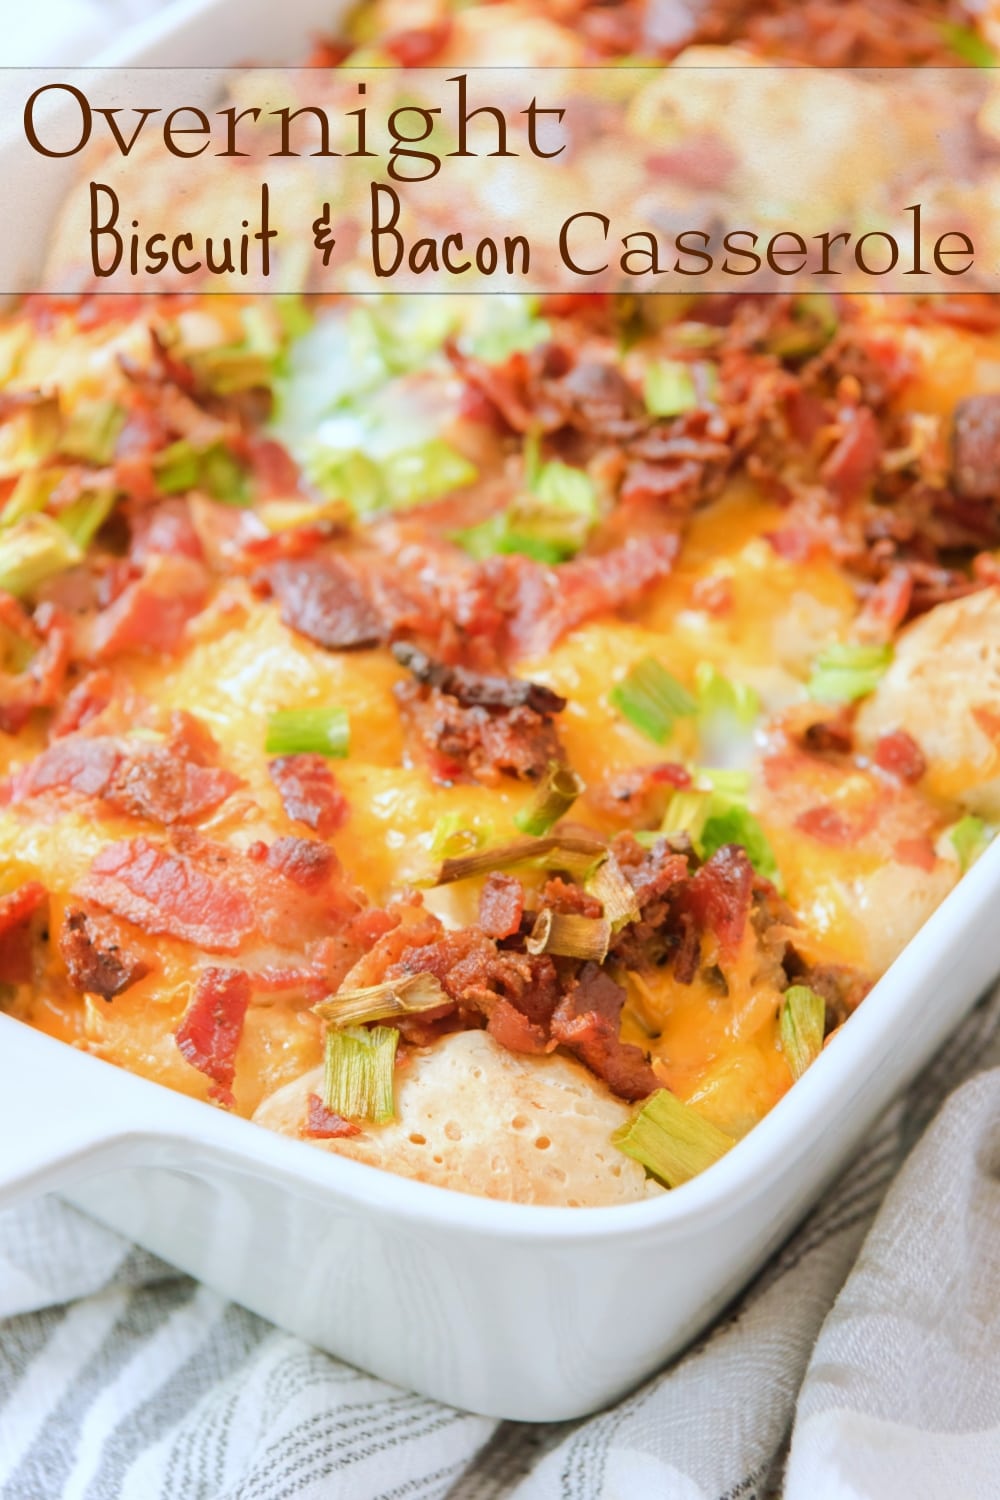 This Overnight (make-ahead) breakfast casserole with biscuits, bacon, sausage and tater tots is the perfect back-pocket recipe for when you are hosting brunch or overnight guests. This easy breakfast casserole recipe treats you to all the best parts of a breakfast plate in a single bite. via @cmpollak1